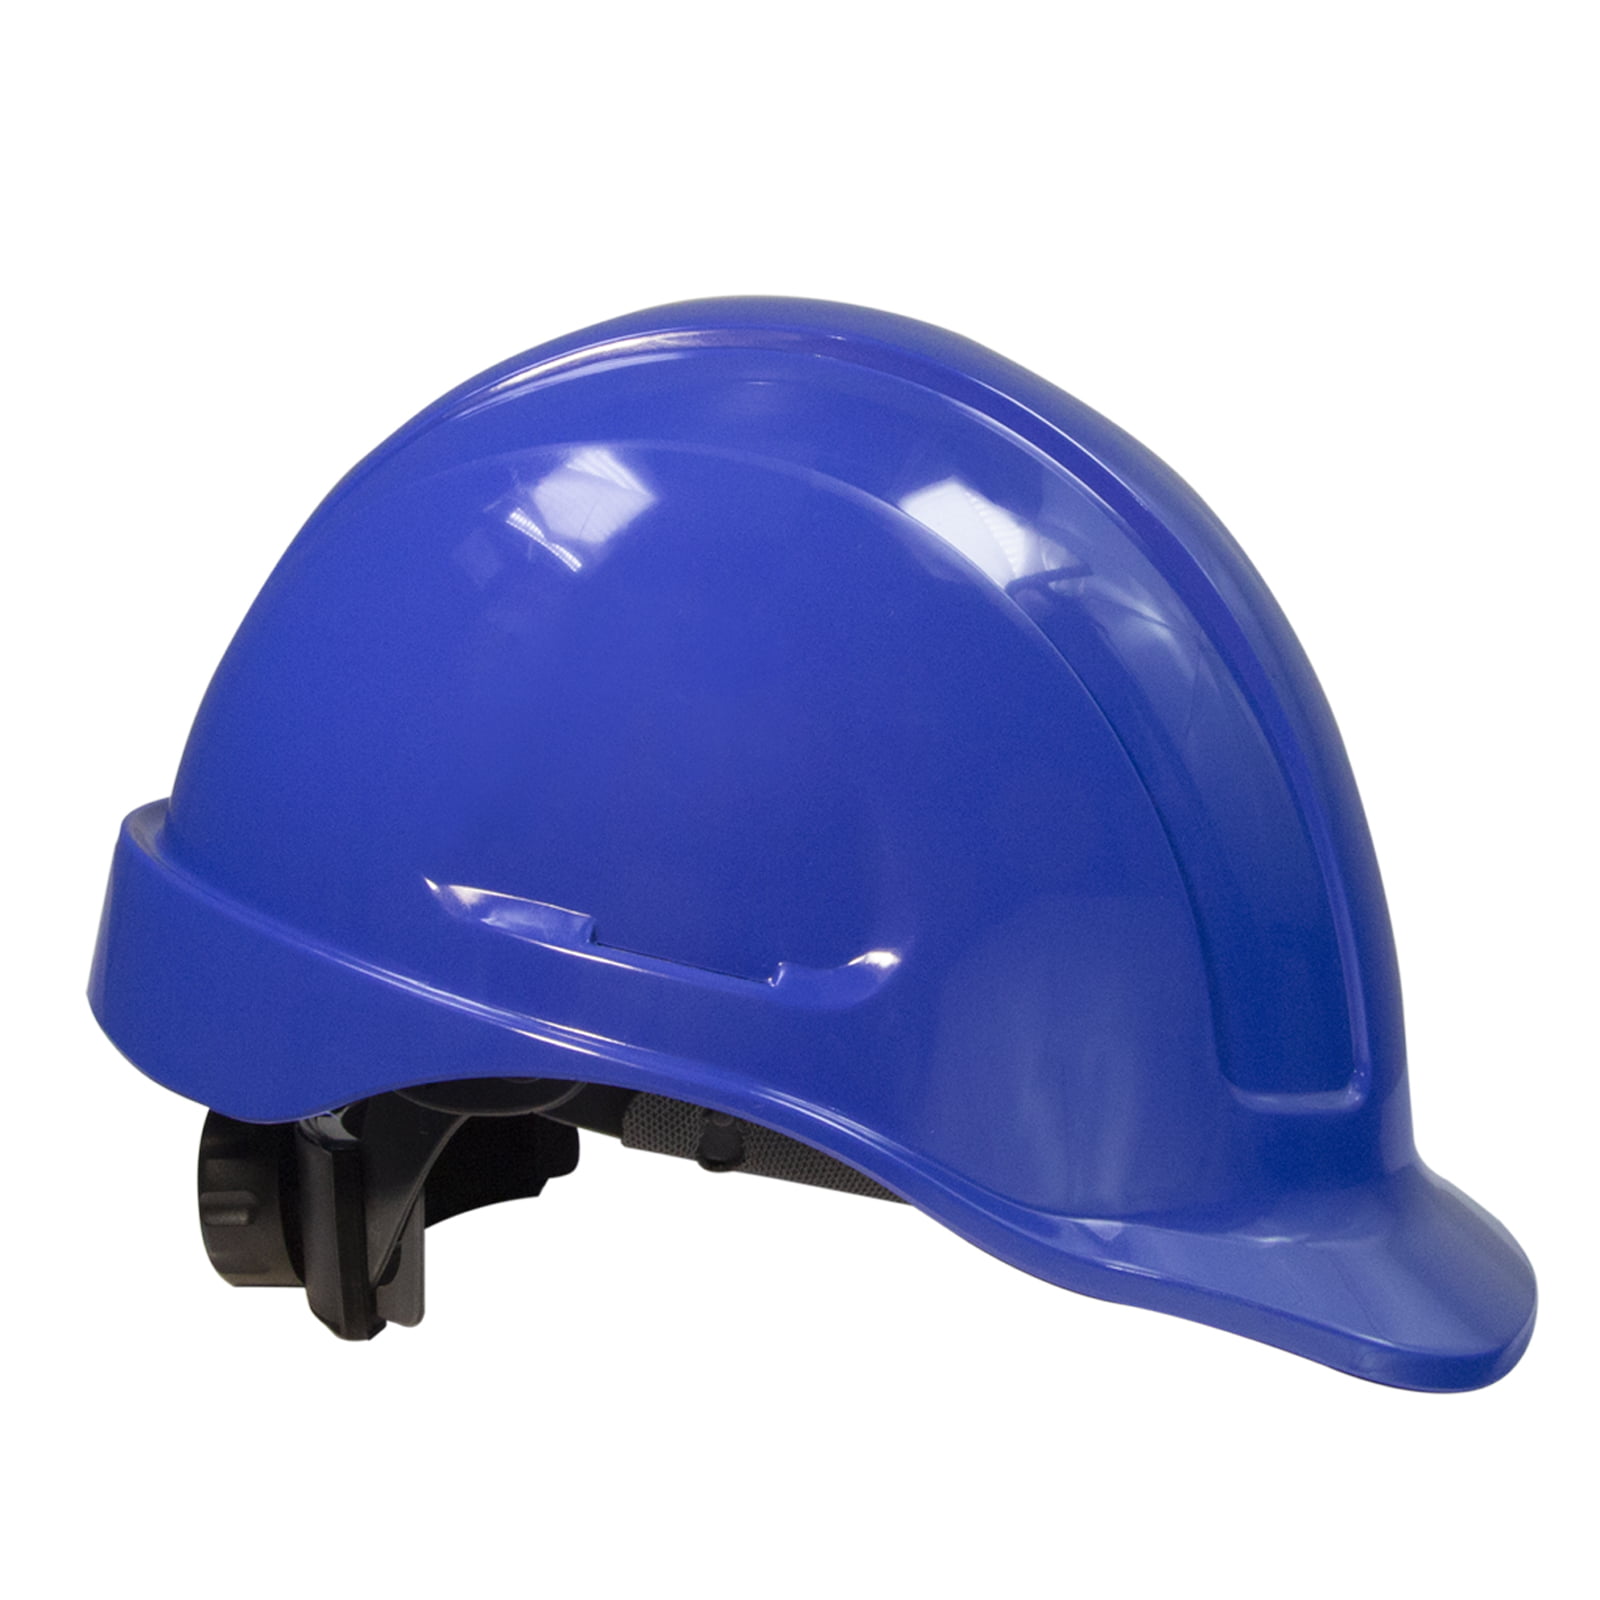 HDPE Cap Style Hard Hat Helmet w/Adjustable Ratchet Suspension For Work White and General Headwear Protection ANSI Z89.1-14 Compliant PPE By JORESTECH Home 